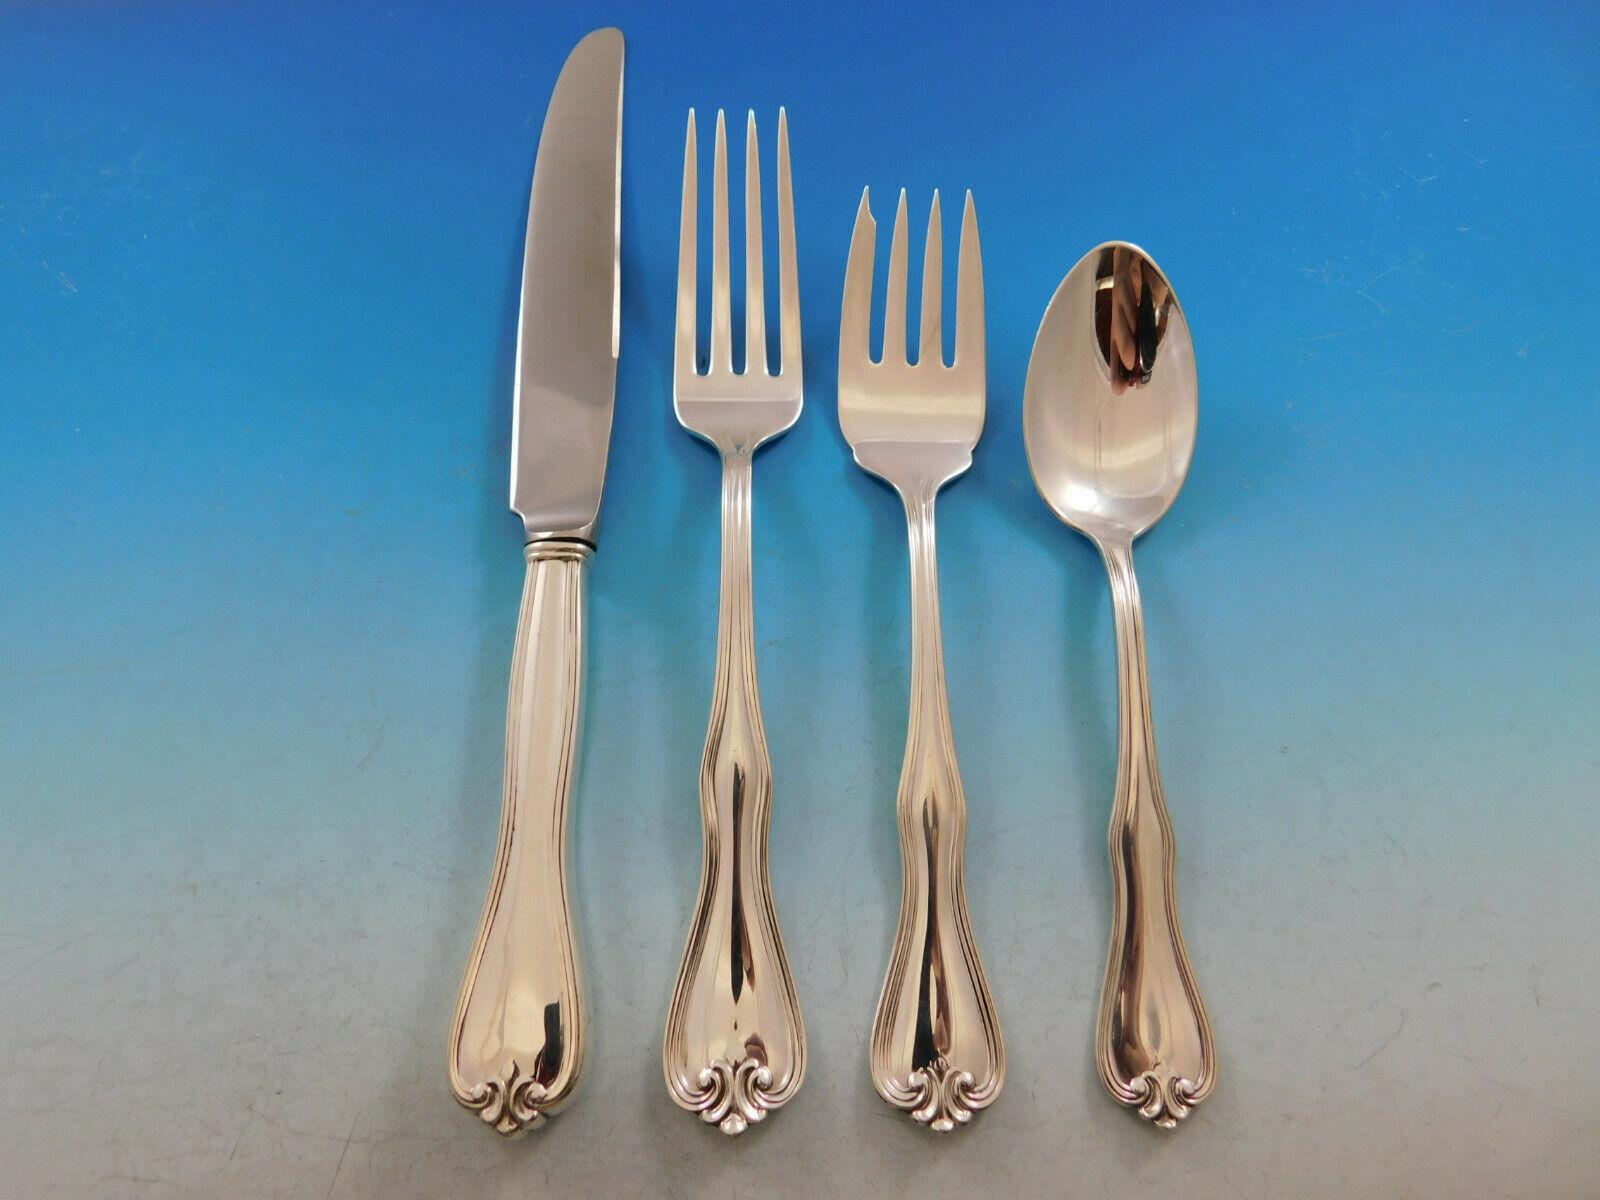 Rare Puritan by Frank Whiting, circa 1905, sterling silver flatware set, 76 pieces. This set includes:

 12 knives, 8 5/8